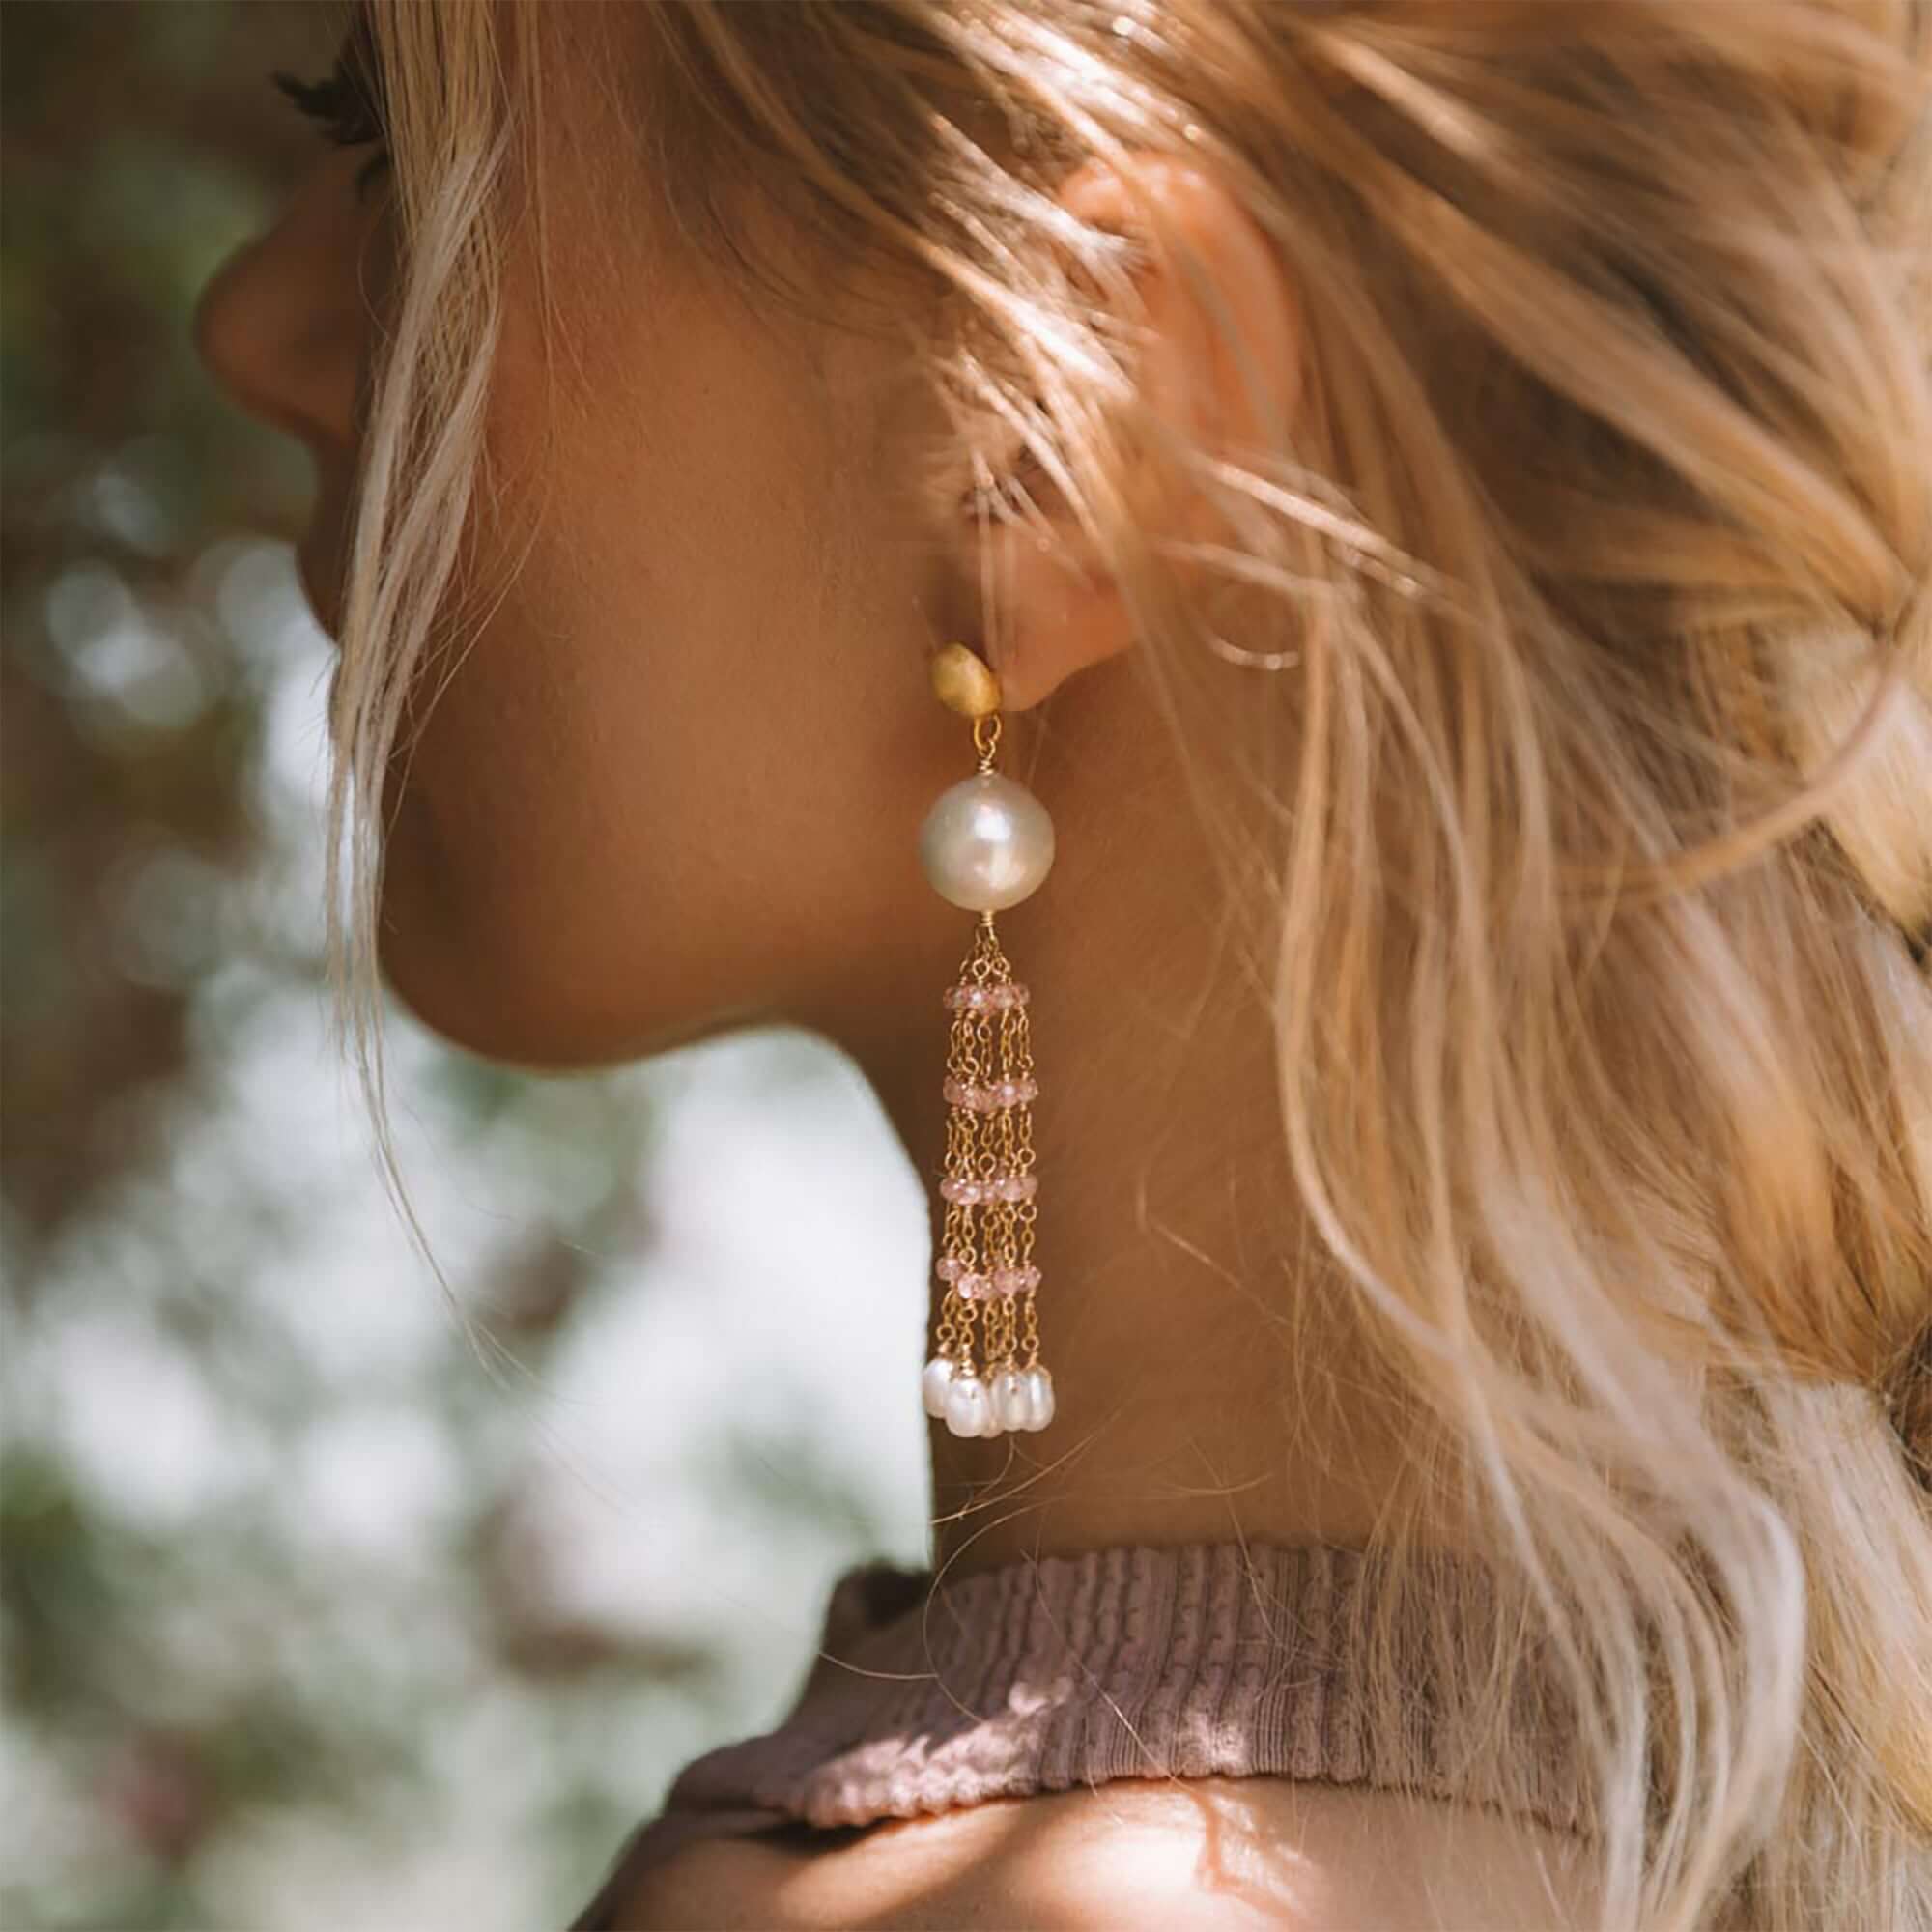 Freshwater baroque pearls, Rose Quartz and bead pearls Tassel Earrings in Gold plated Italian Silver